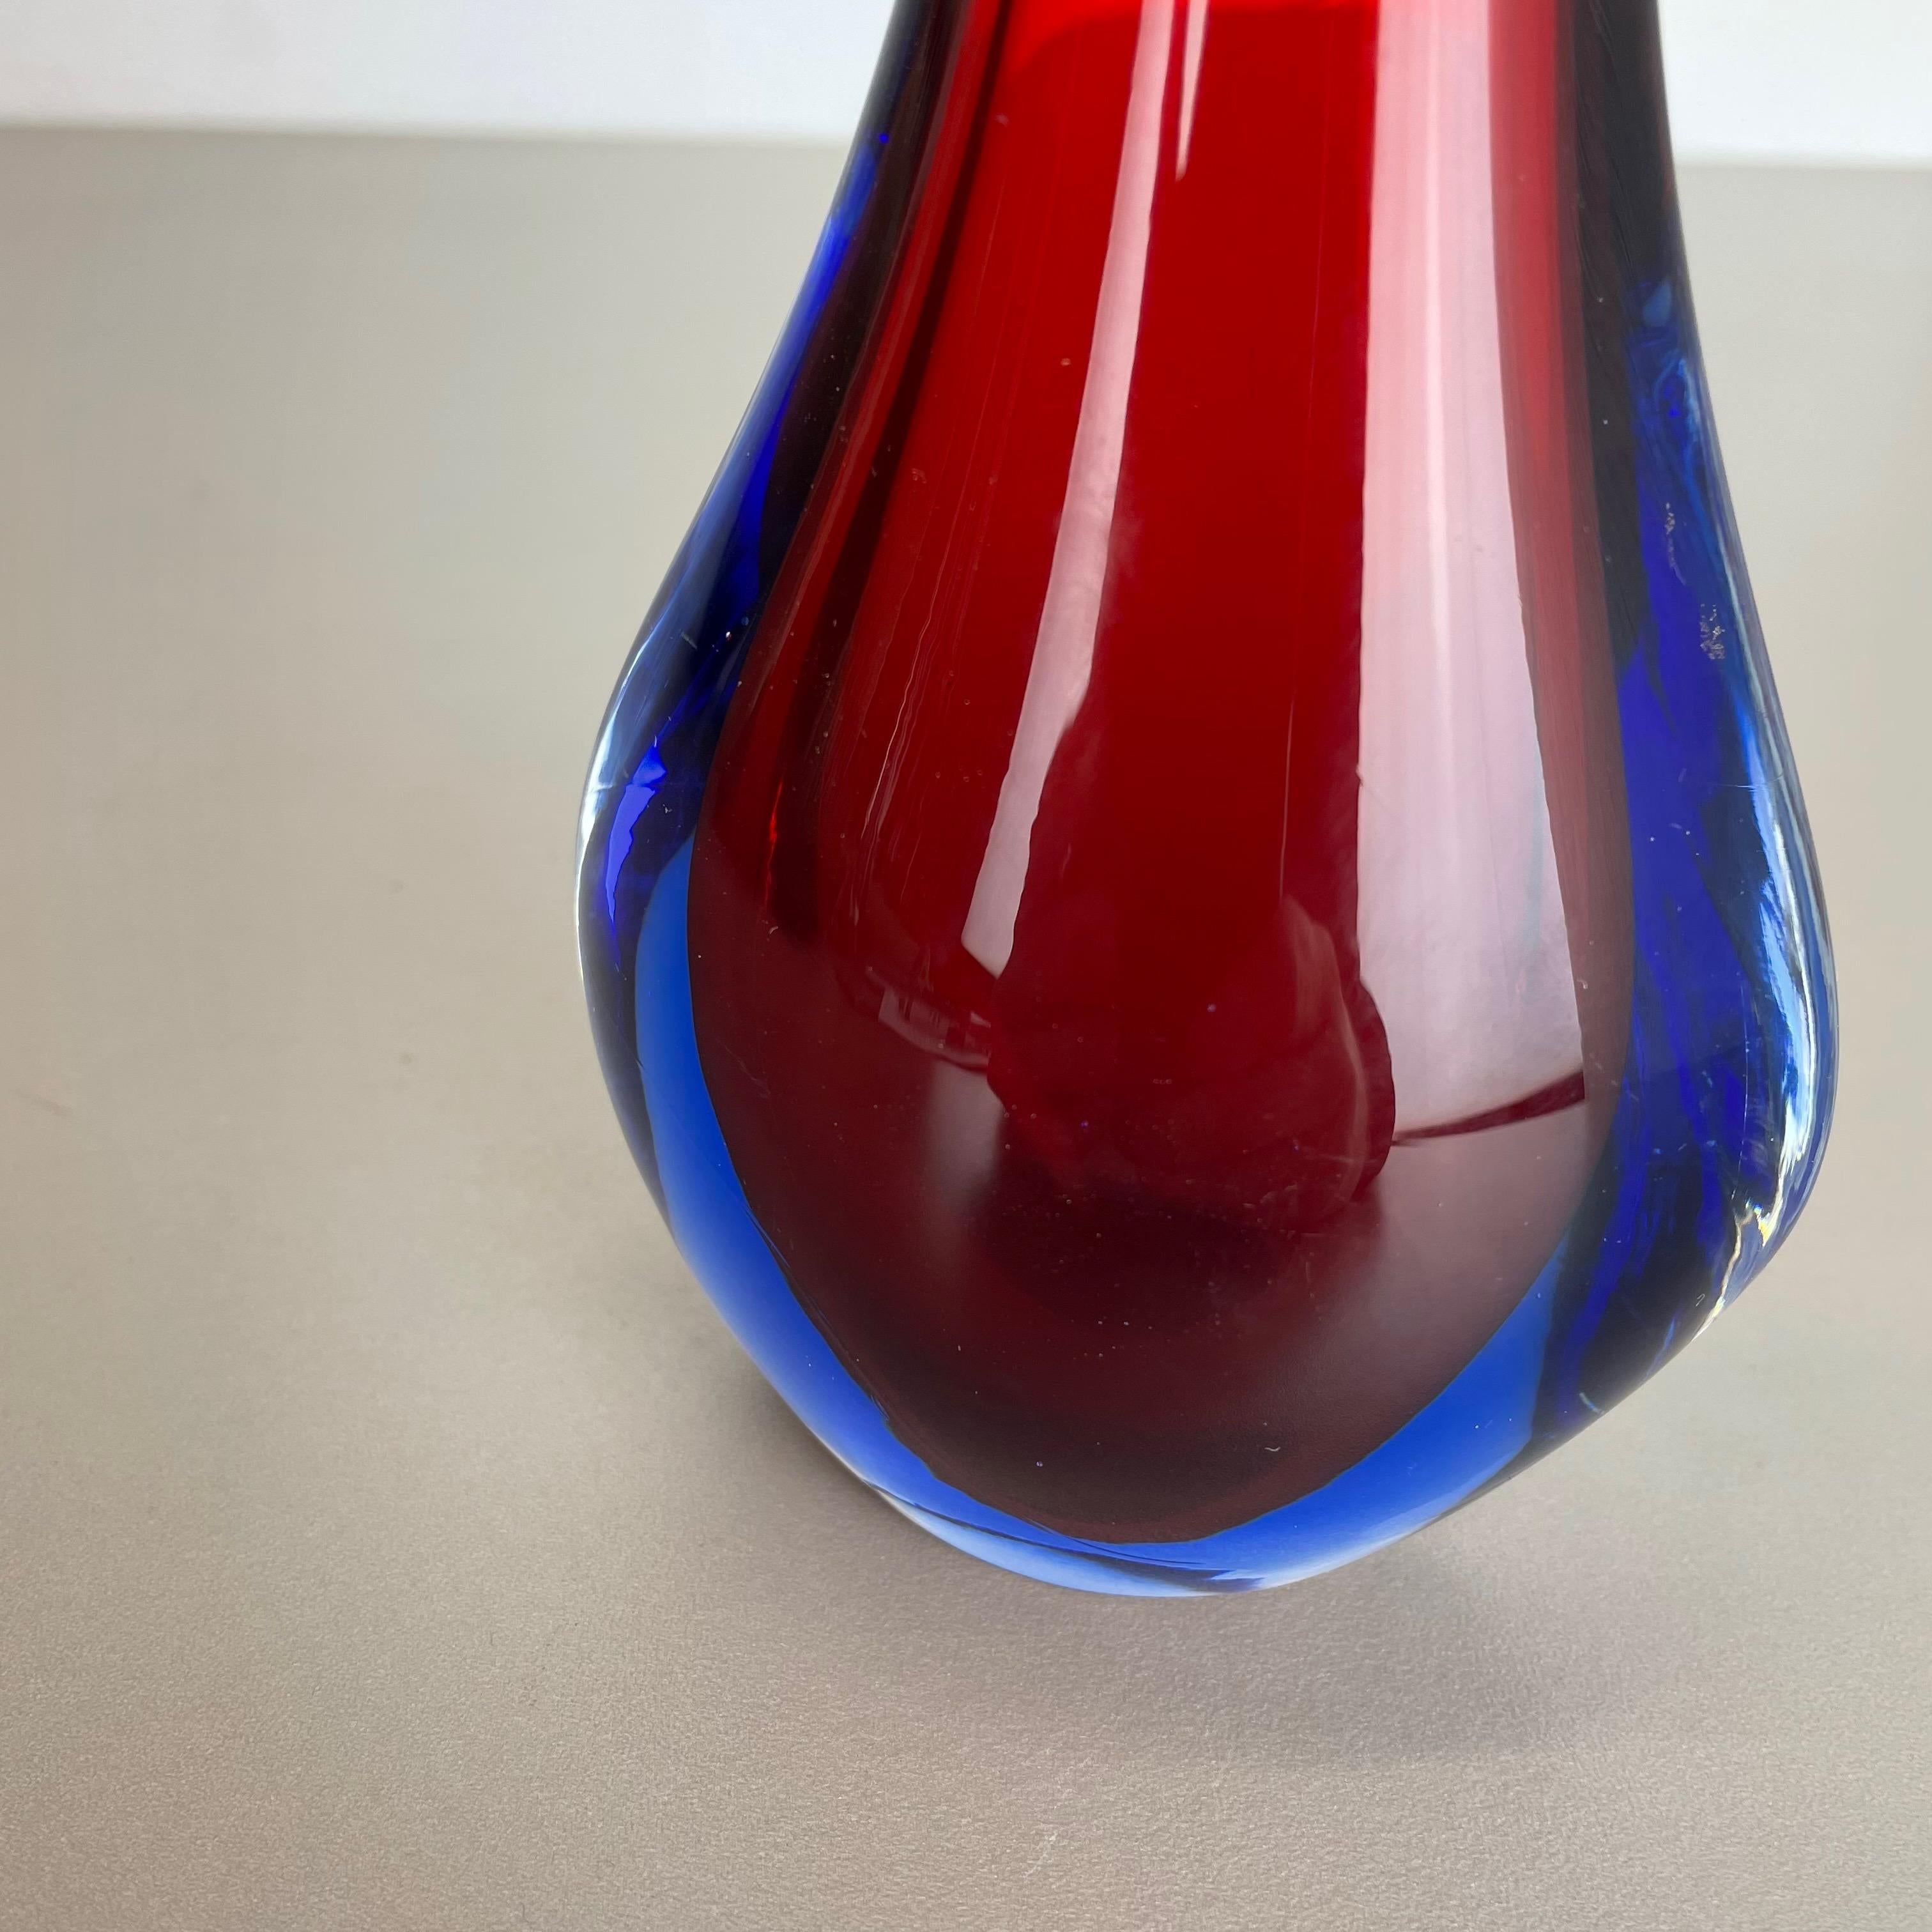 20th Century Large 1960s Murano Glass Sommerso 29cm Single-Stem Vase by Flavio Poli, Italy For Sale